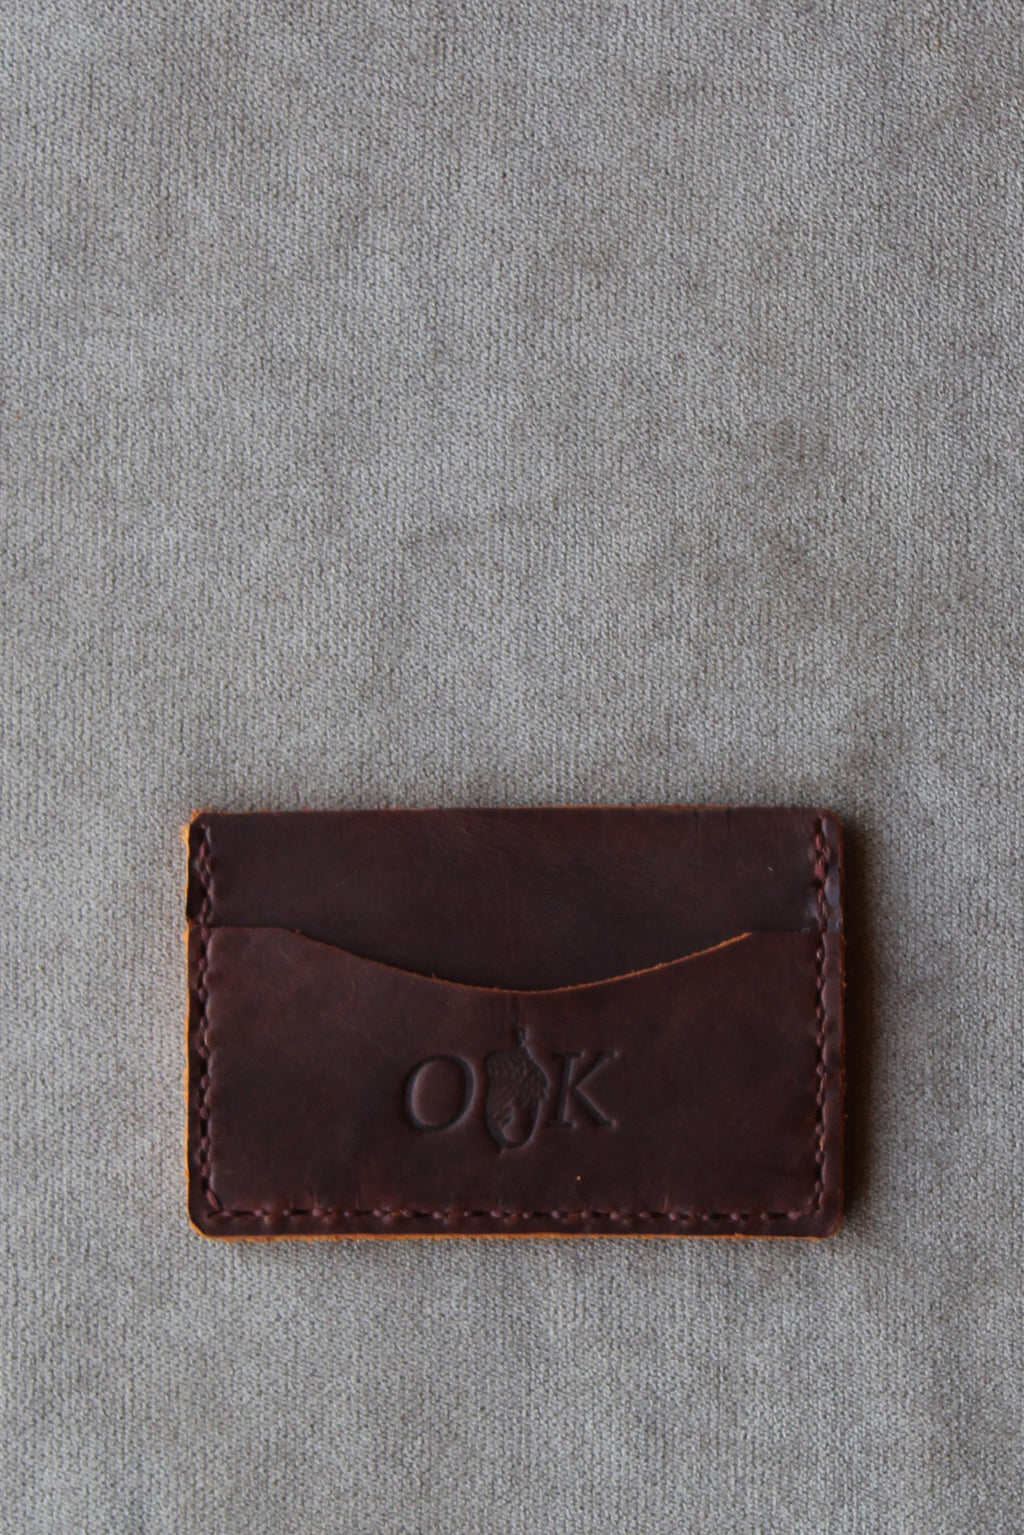 photo of the simplistic cardholder wallet